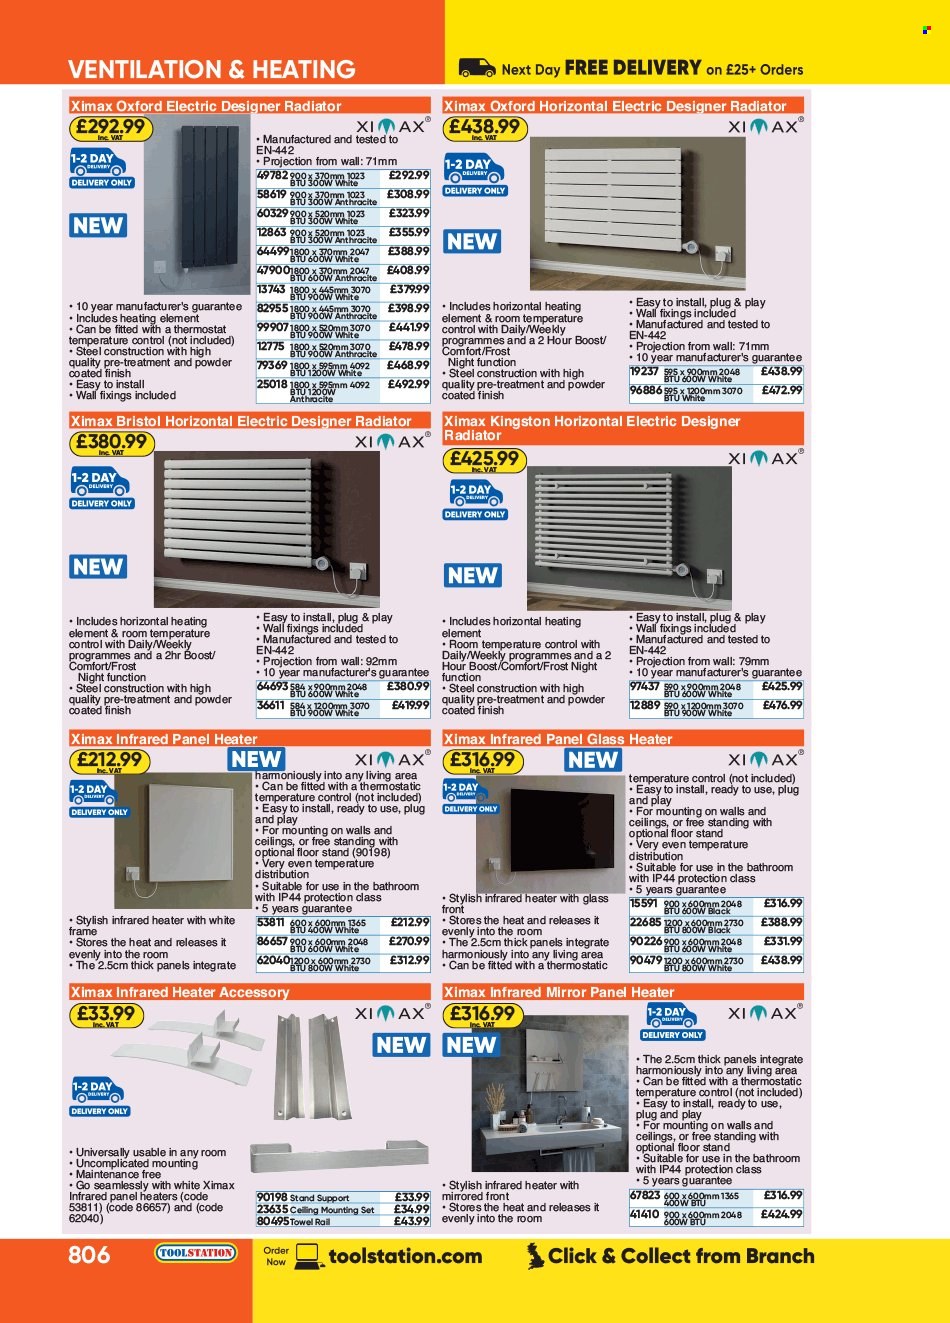 Toolstation offer . Page 806.